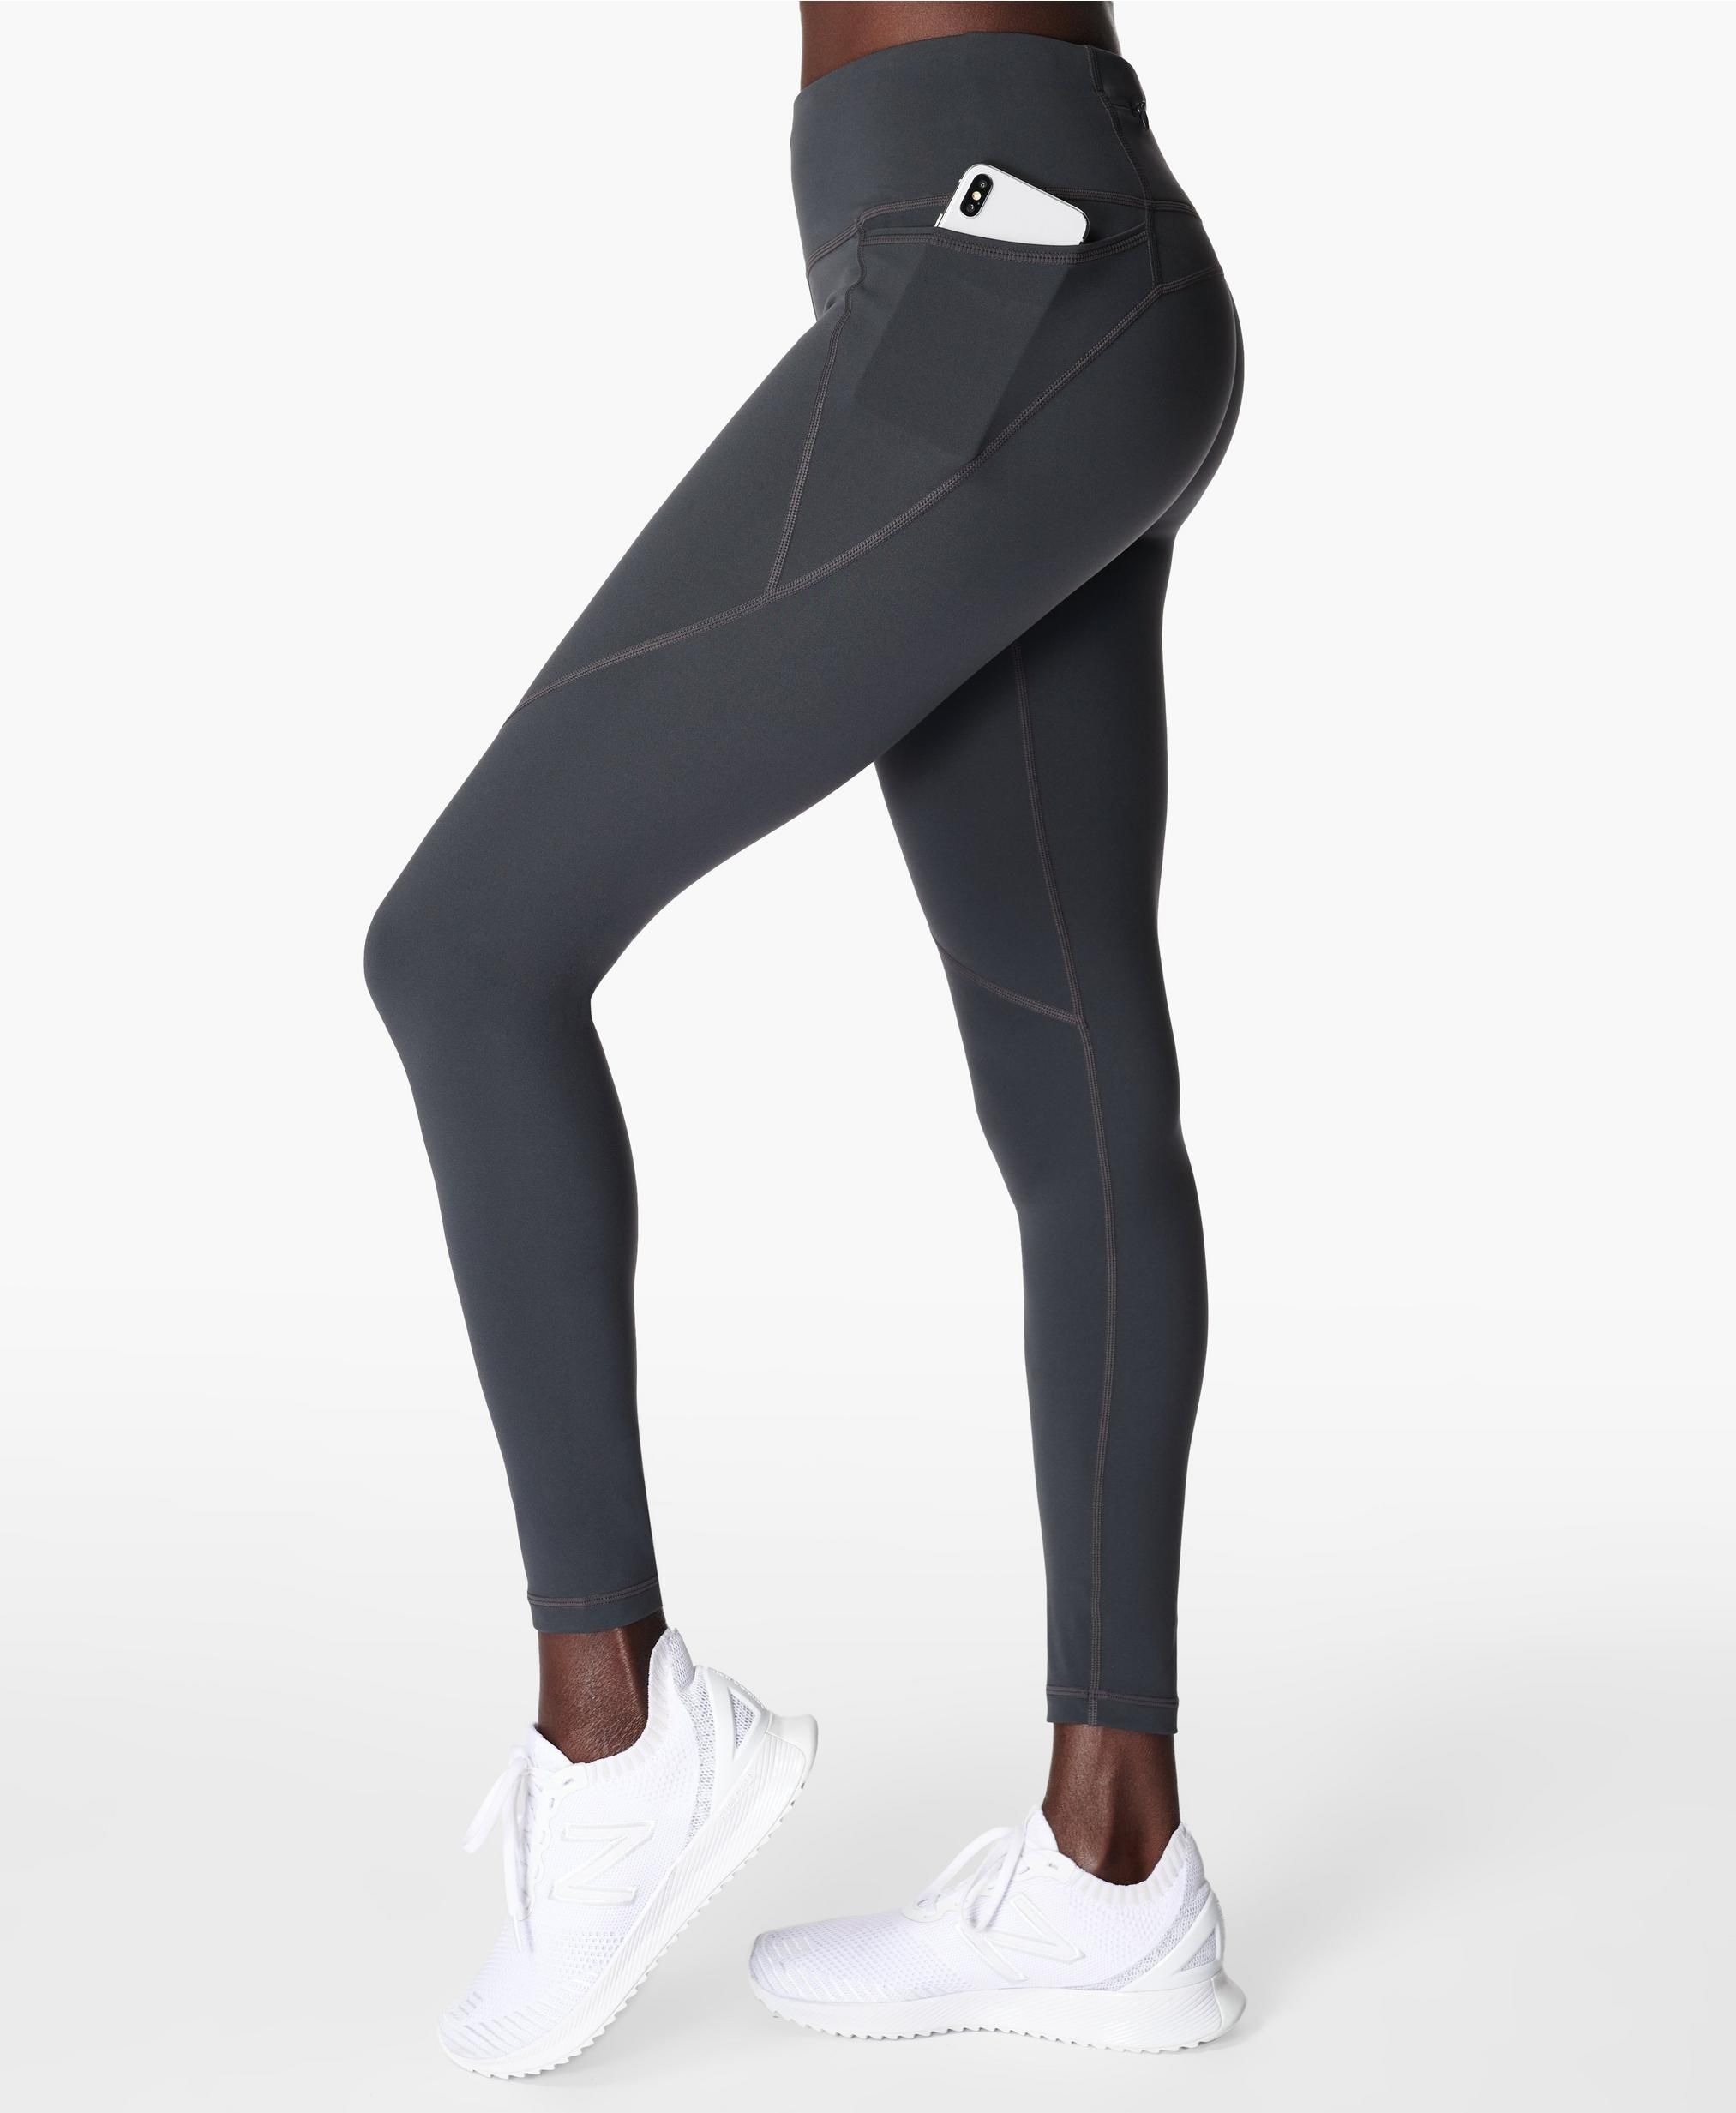 23 Best Gym Leggings With Pockets From 